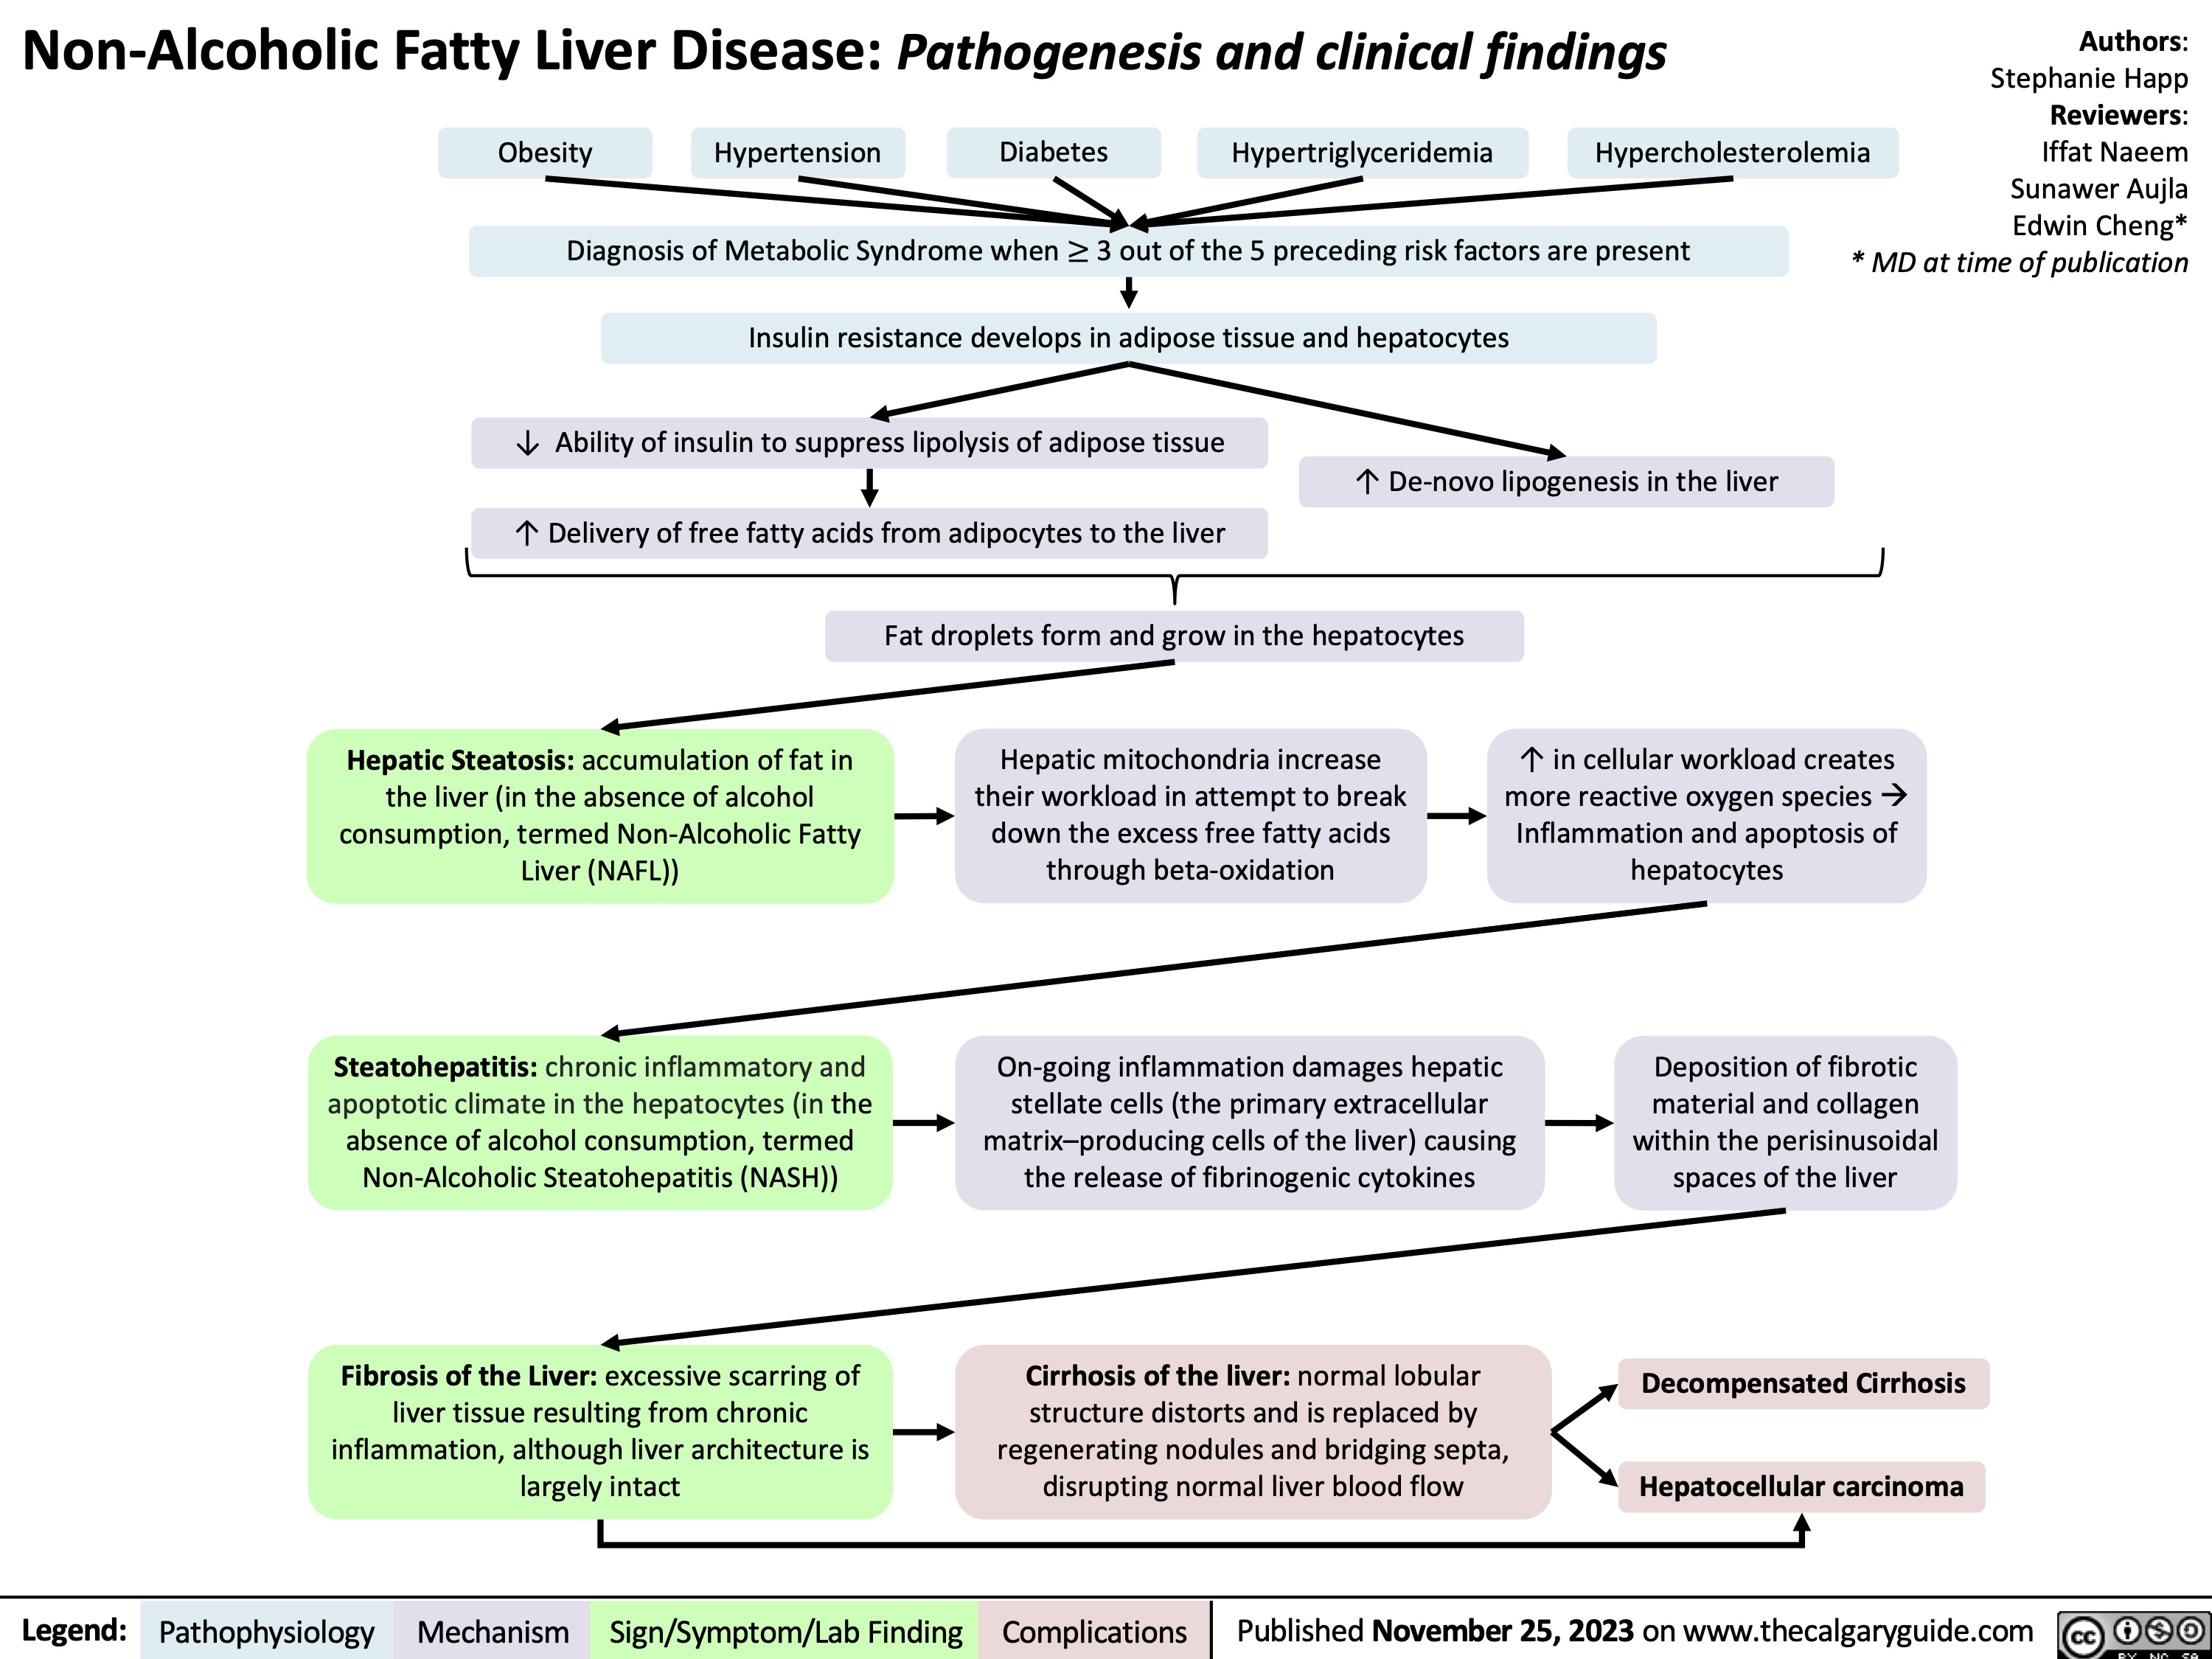 Non-Alcoholic Fatty Liver Disease: Pathogenesis and clinical findings Diagnosis of Metabolic Syndrome when ≥ 3 out of the 5 preceding risk factors are present
Authors: Stephanie Happ Reviewers: Obesity Hypertension Diabetes Hypertriglyceridemia Hypercholesterolemia Iffat Naeem Sunawer Aujla Edwin Cheng* * MD at time of publication
        Insulin resistance develops in adipose tissue and hepatocytes
   ↓ Ability of insulin to suppress lipolysis of adipose tissue
↑ Delivery of free fatty acids from adipocytes to the liver
↑ De-novo lipogenesis in the liver
        Hepatic Steatosis: accumulation of fat in the liver (in the absence of alcohol consumption, termed Non-Alcoholic Fatty Liver (NAFL))
Steatohepatitis: chronic inflammatory and apoptotic climate in the hepatocytes (in the absence of alcohol consumption, termed Non-Alcoholic Steatohepatitis (NASH))
Fibrosis of the Liver: excessive scarring of liver tissue resulting from chronic inflammation, although liver architecture is largely intact
Fat droplets form and grow in the hepatocytes
Hepatic mitochondria increase their workload in attempt to break down the excess free fatty acids through beta-oxidation
↑ in cellular workload creates more reactive oxygen speciesà Inflammation and apoptosis of hepatocytes
    On-going inflammation damages hepatic stellate cells (the primary extracellular matrix–producing cells of the liver) causing the release of fibrinogenic cytokines
Cirrhosis of the liver: normal lobular structure distorts and is replaced by regenerating nodules and bridging septa, disrupting normal liver blood flow
Deposition of fibrotic
material and collagen within the perisinusoidal spaces of the liver
Decompensated Cirrhosis Hepatocellular carcinoma
       Legend:
 Pathophysiology
Mechanism
Sign/Symptom/Lab Finding
 Complications
Published November 25, 2023 on www.thecalgaryguide.com
    